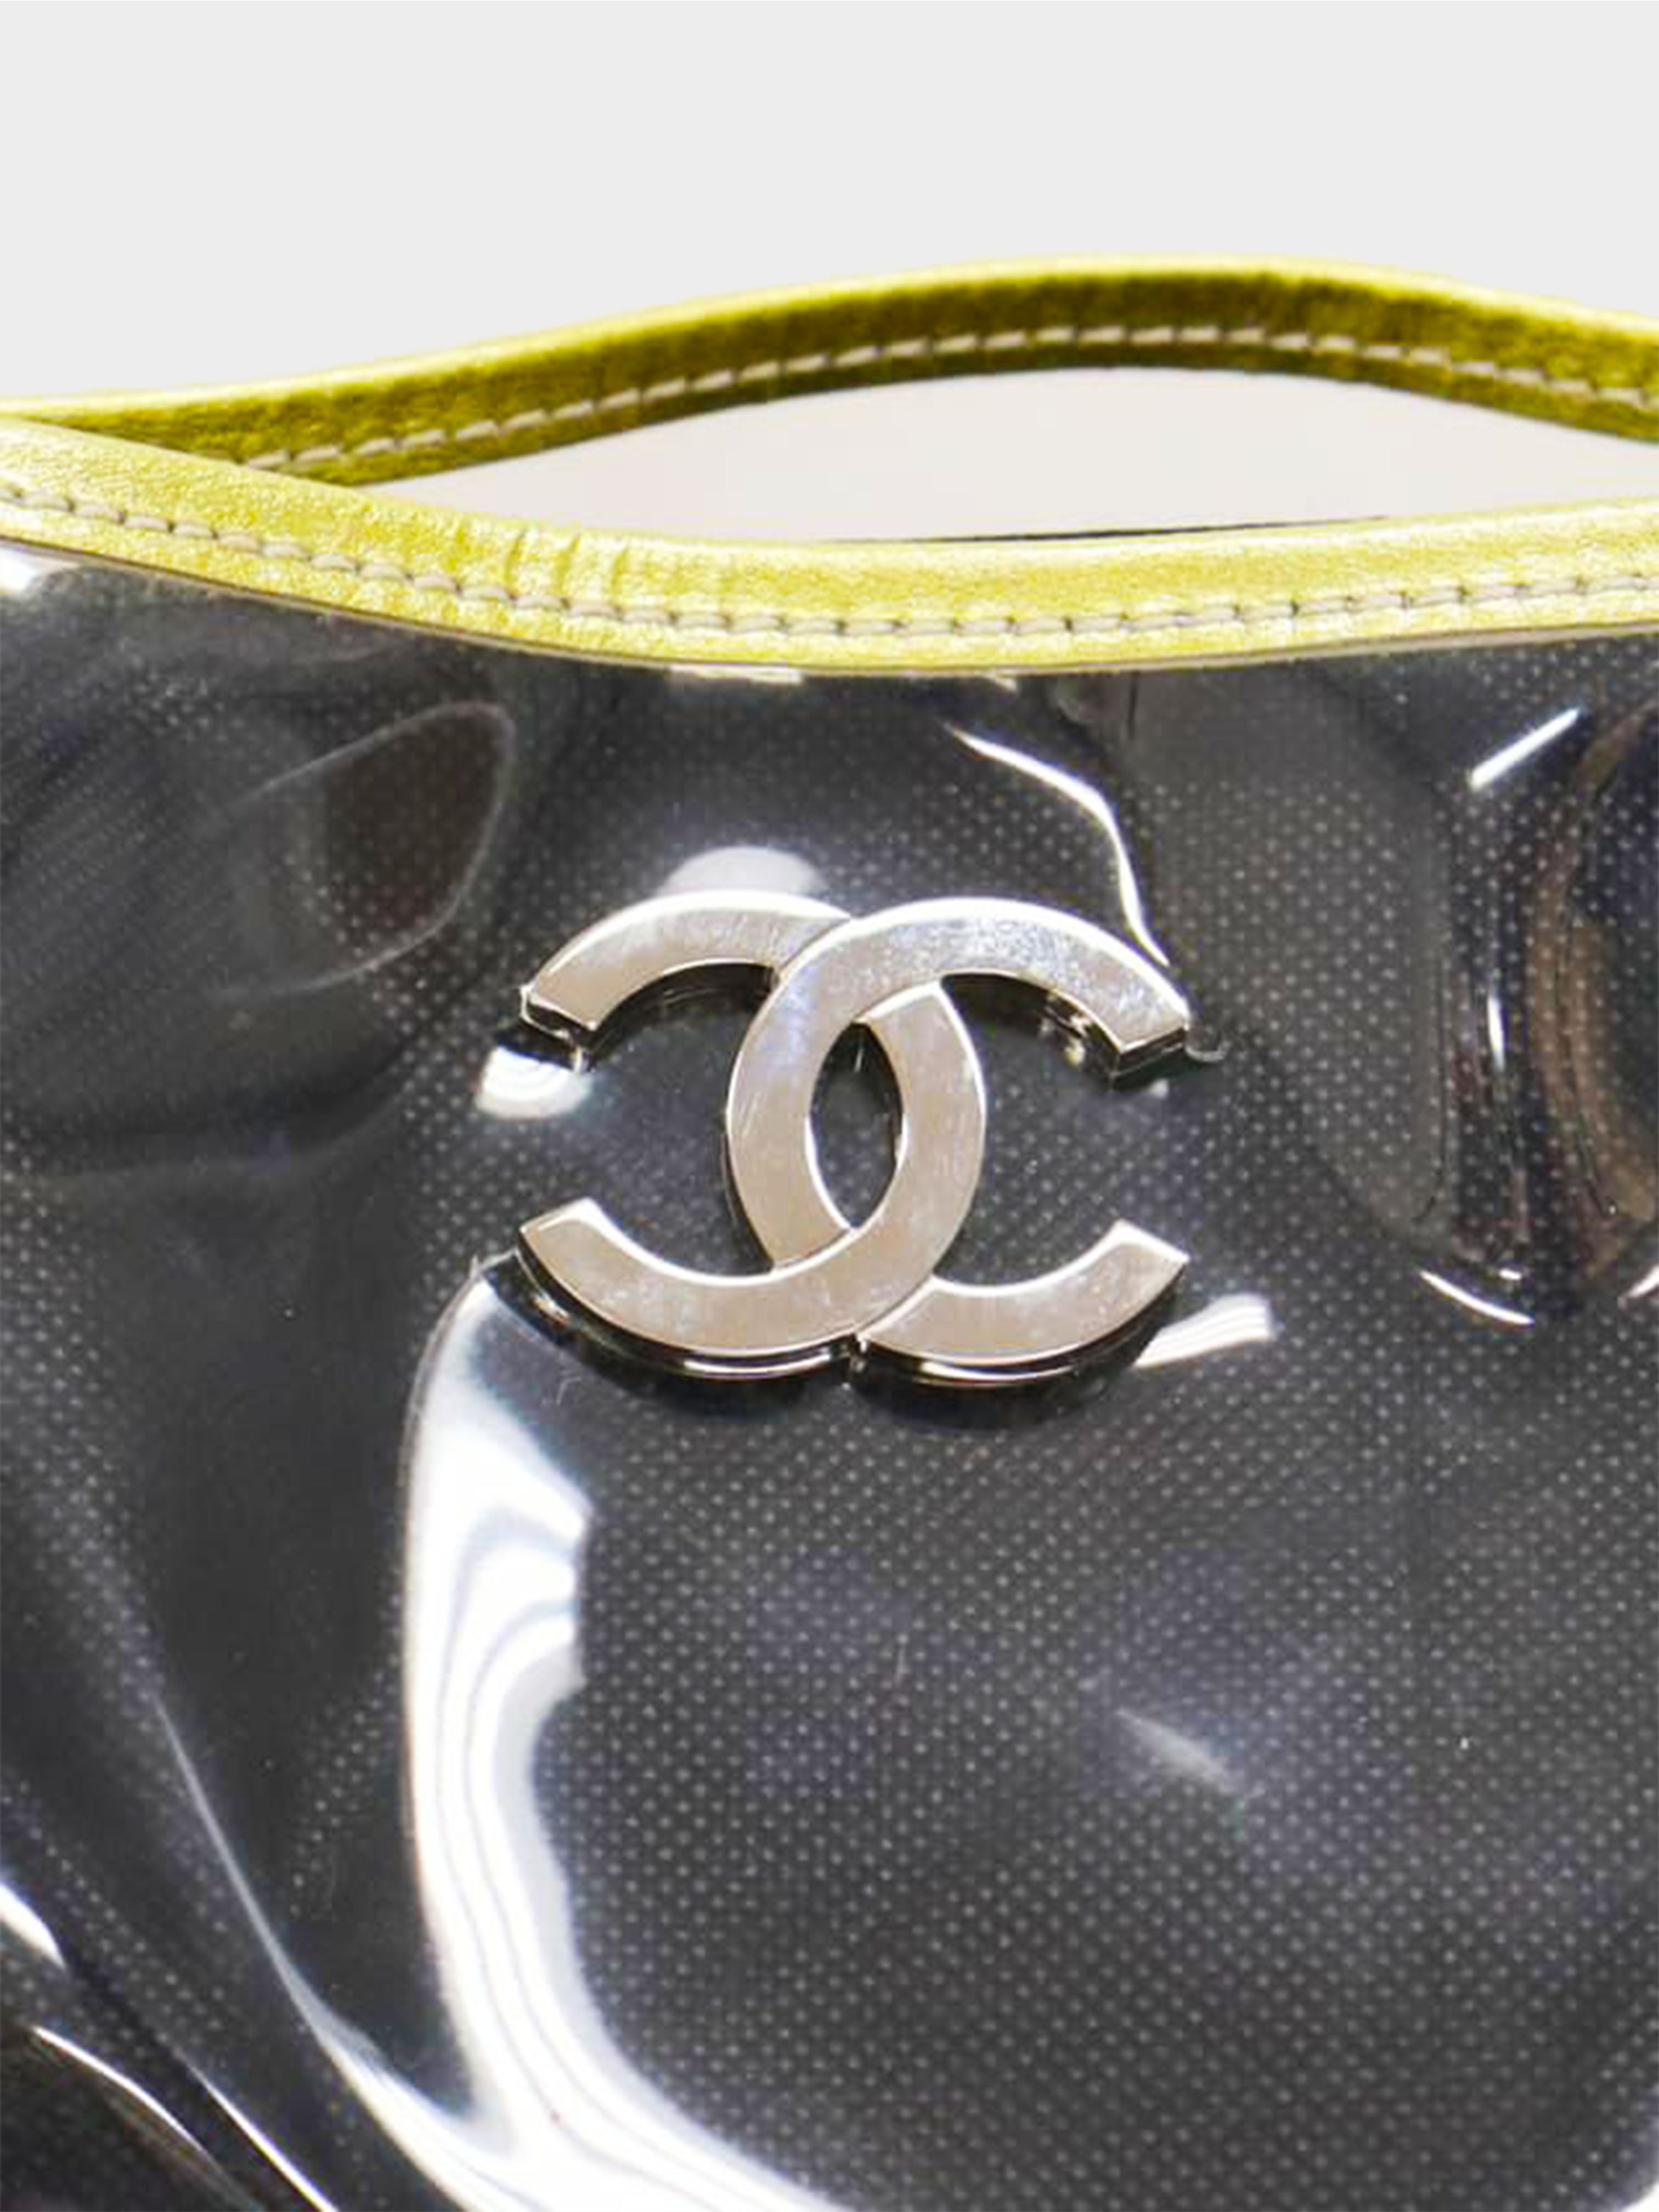 Chanel 2007 Gold Trimmed Vinyl Tote Bag · INTO